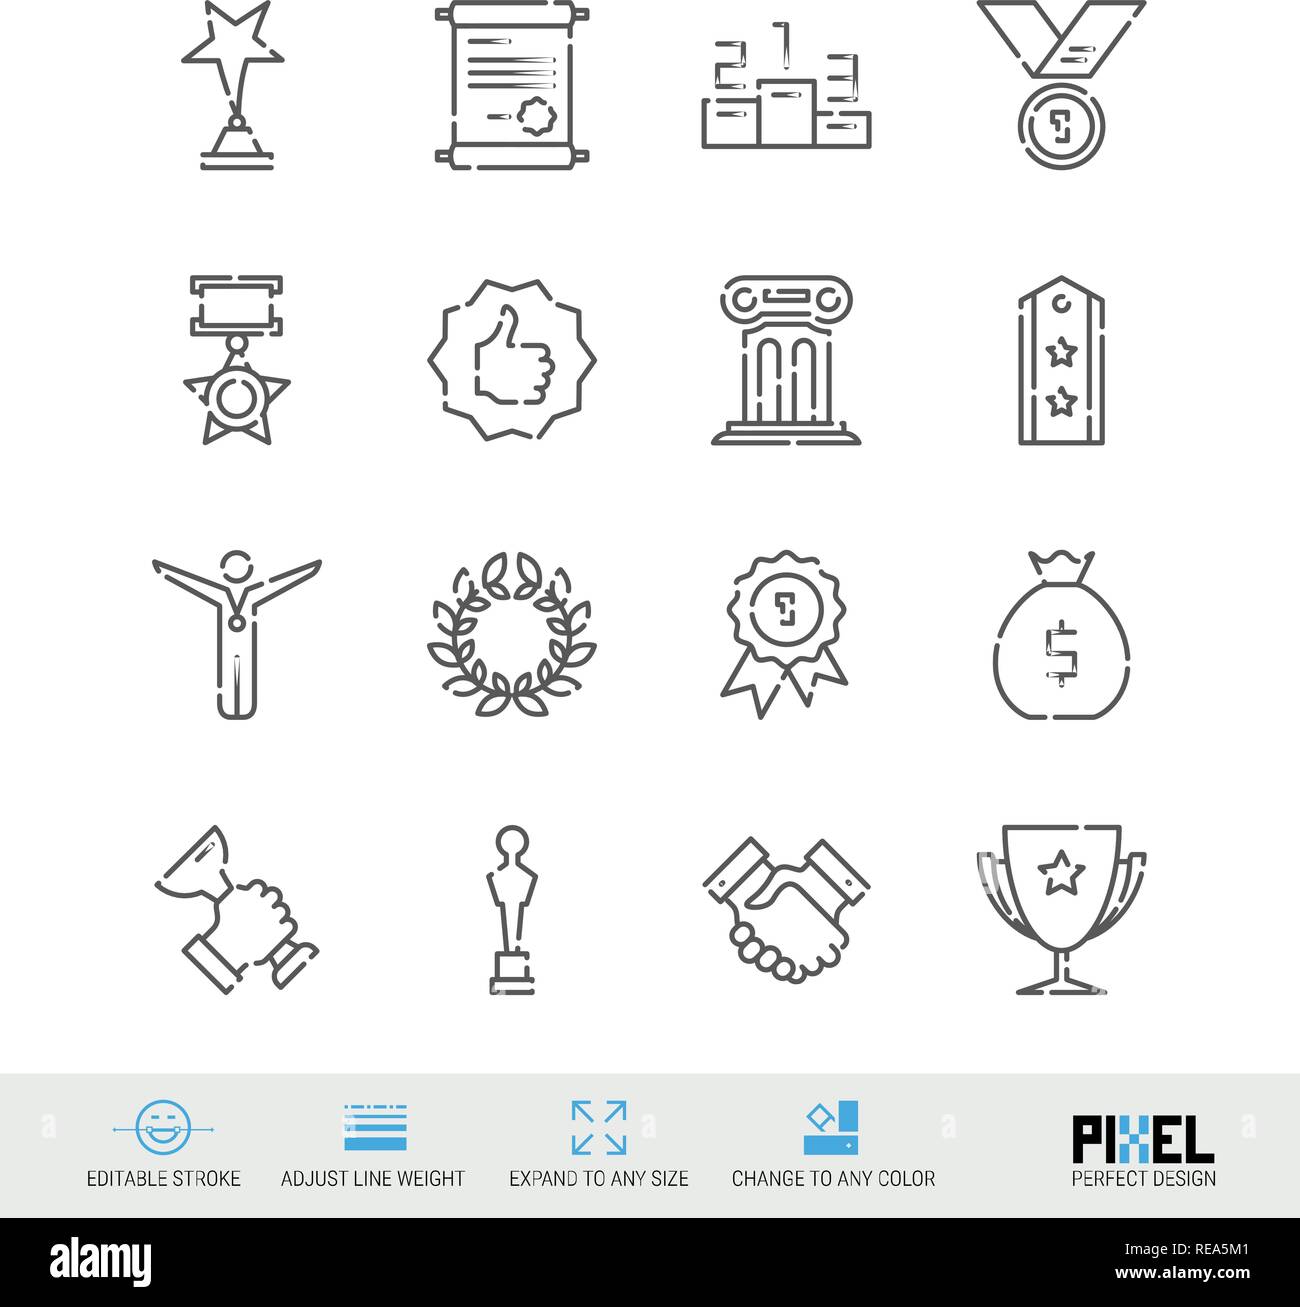 Vector Line Icon Set. Awards Related Linear Icons. Success, Achievment Symbols, Pictograms, Signs Stock Vector